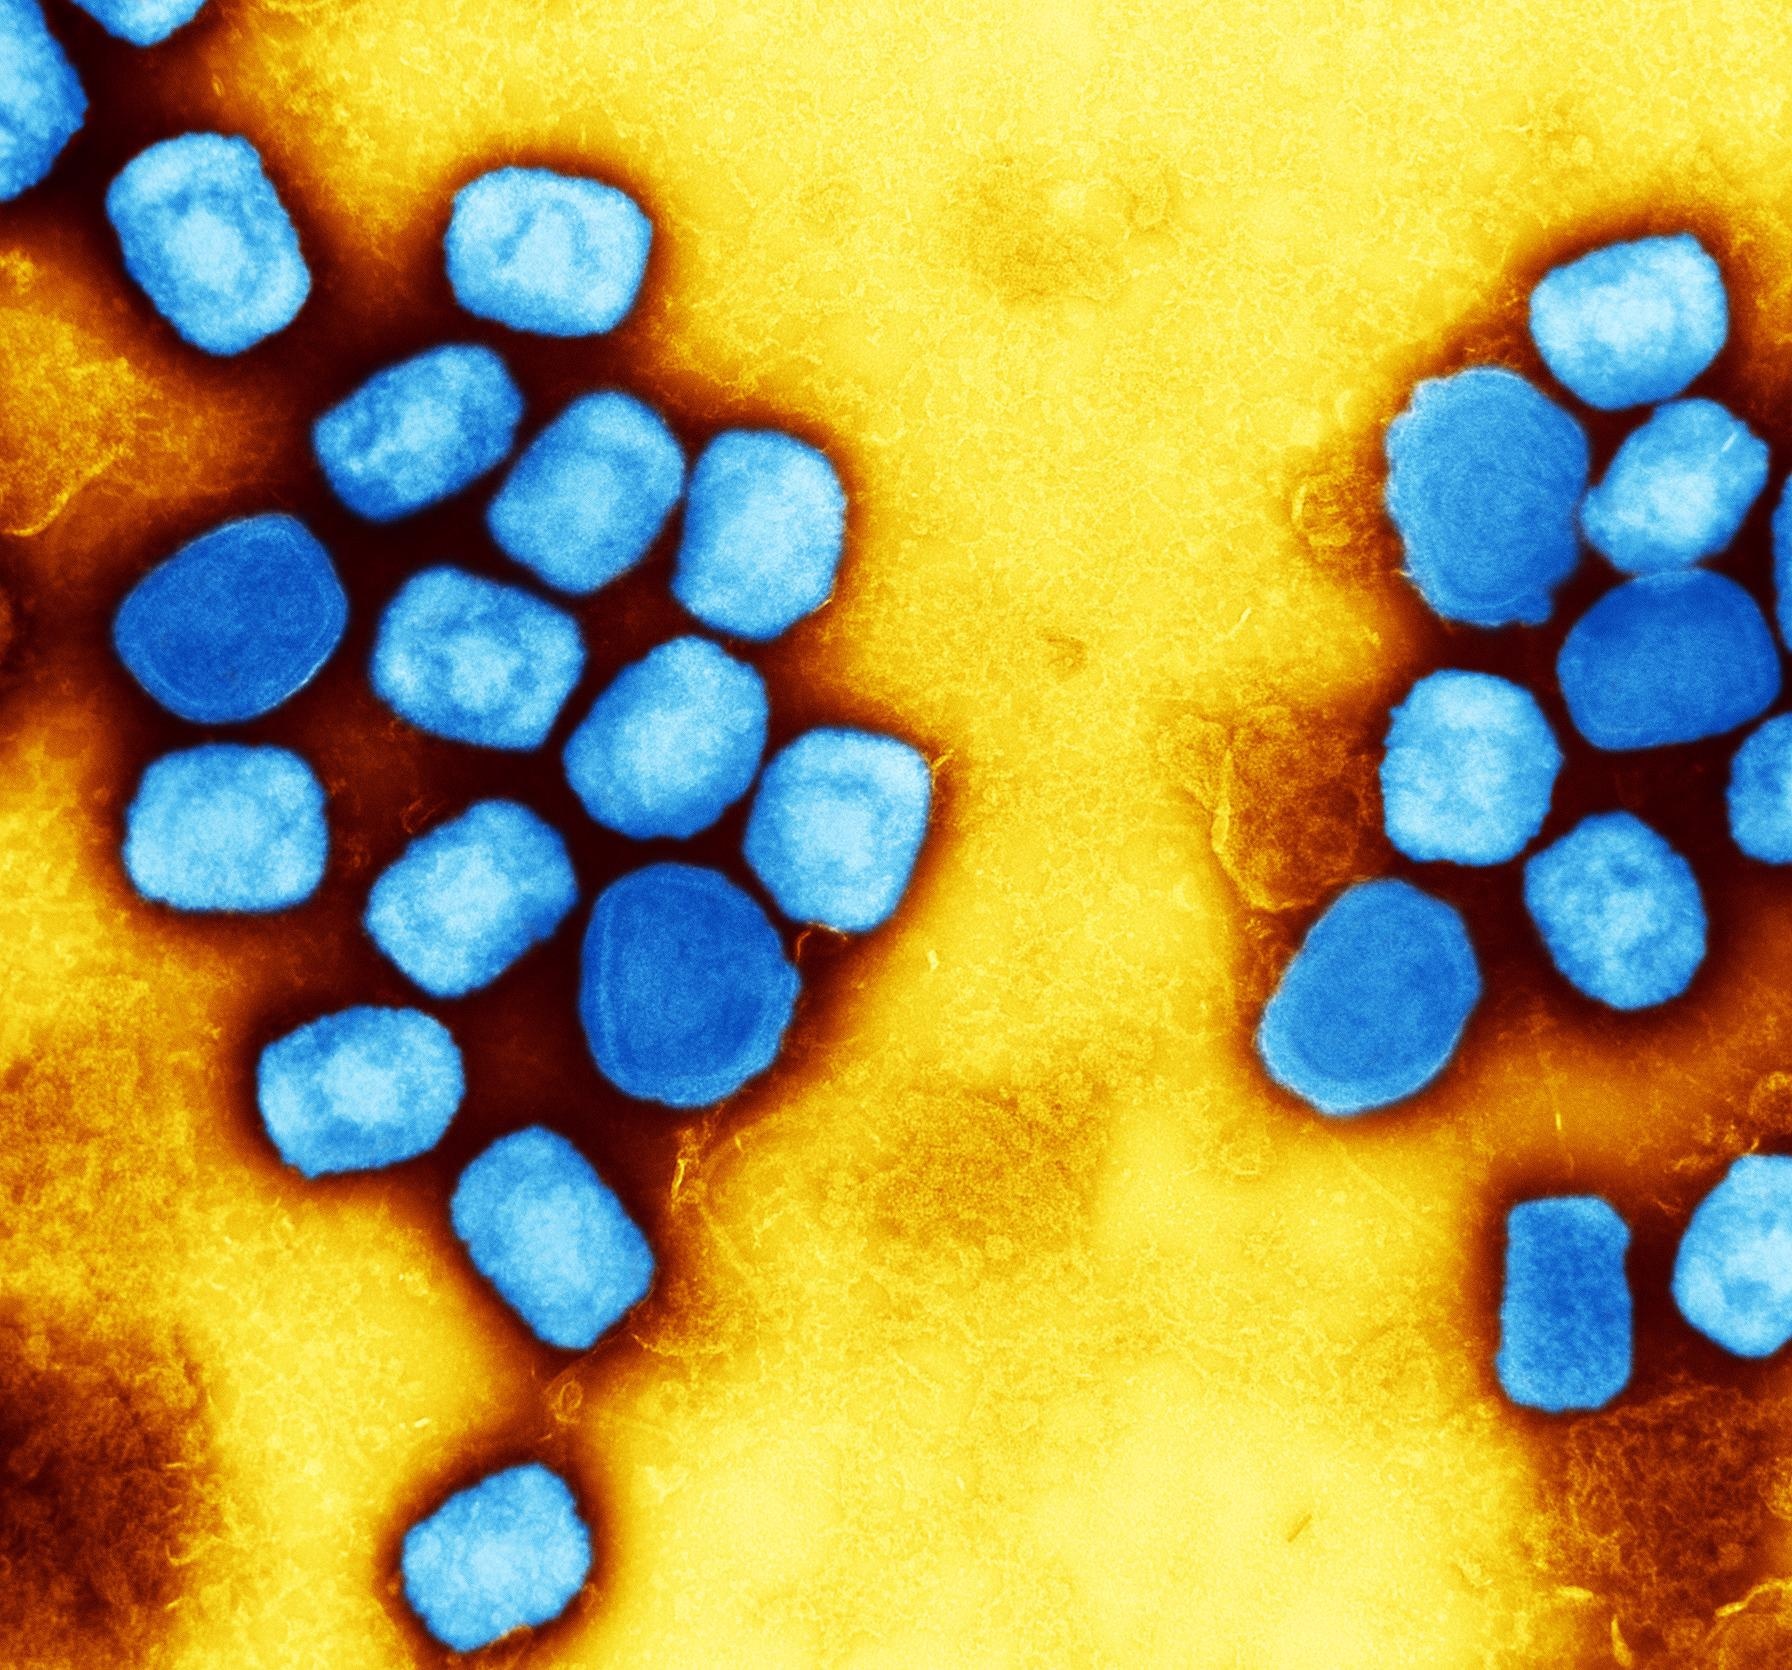 Colorized transmission electron micrograph of monkeypox virus particles (blue) cultivated and purified from cell culture. Image captured at the NIAID Integrated Research Facility (IRF) in Fort Detrick, Maryland. Credit: NIAID